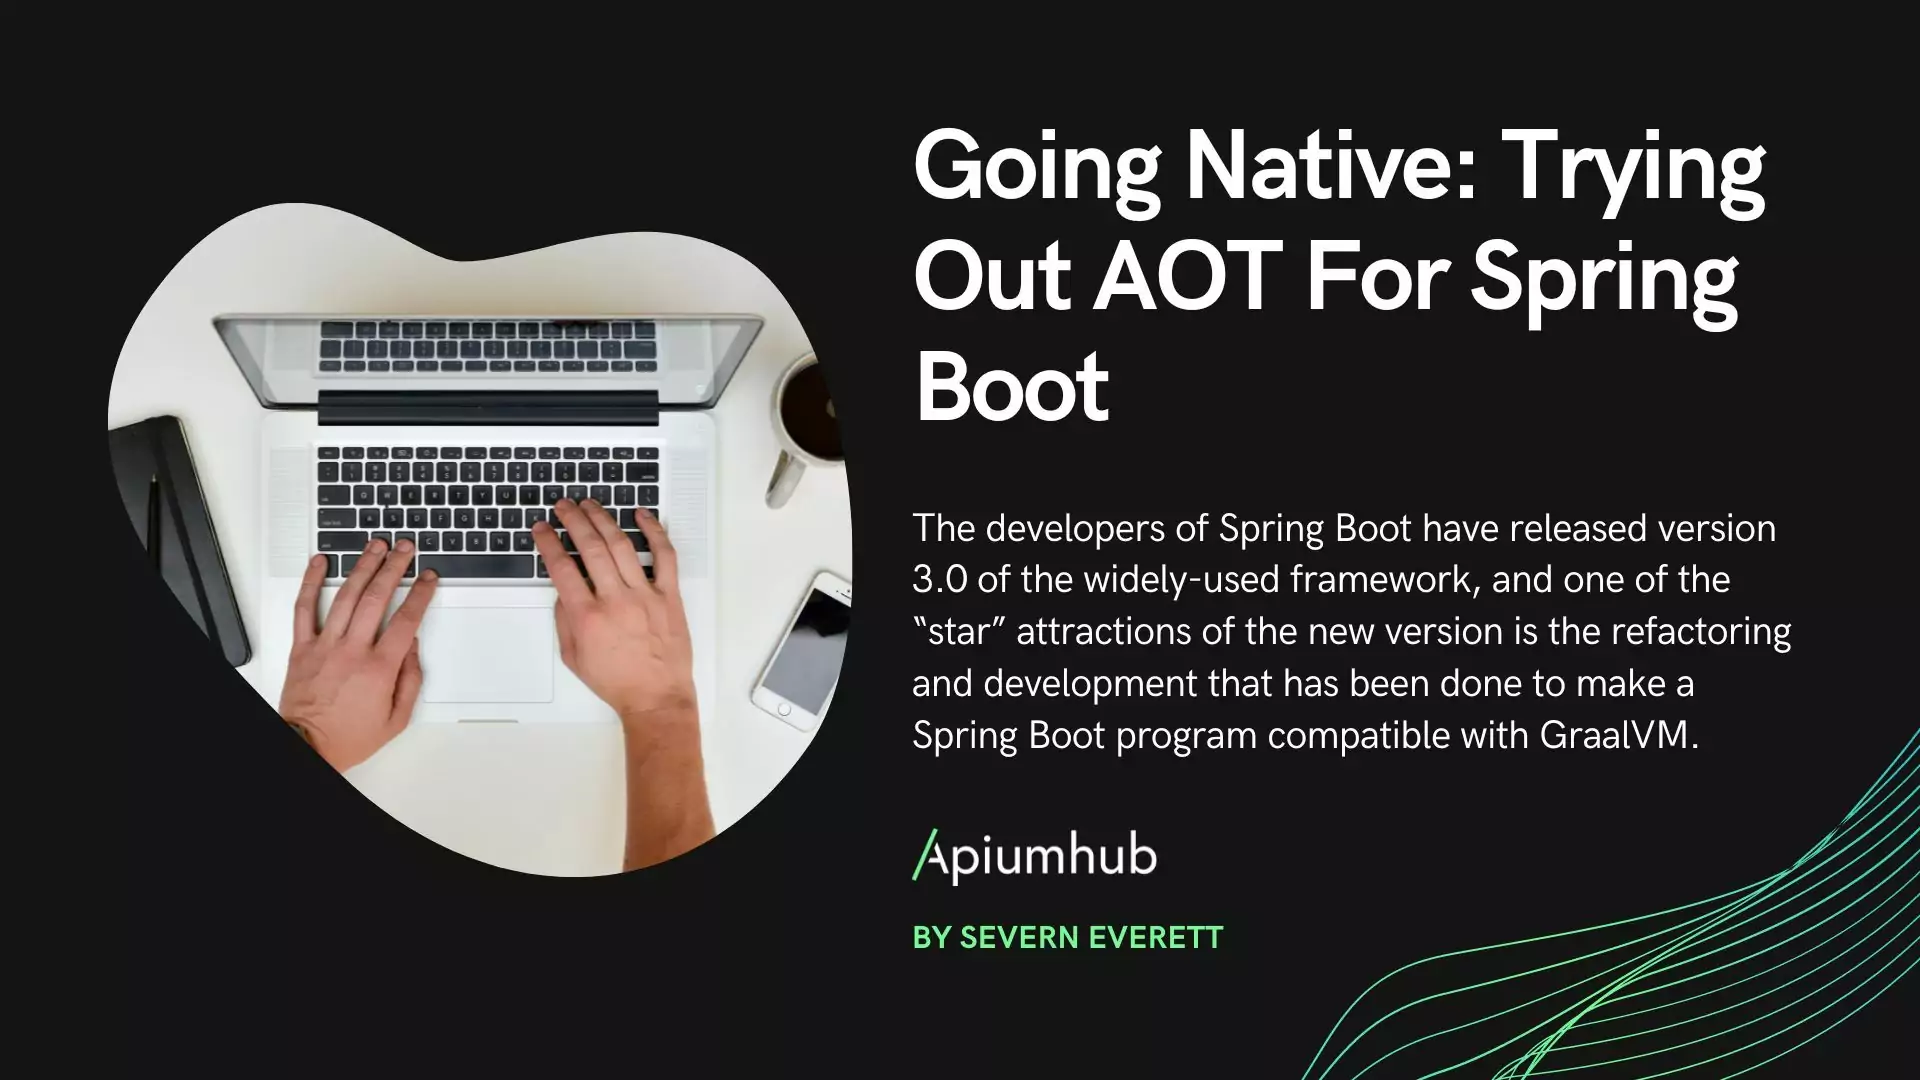 Going native: trying AOT for Spring Boot